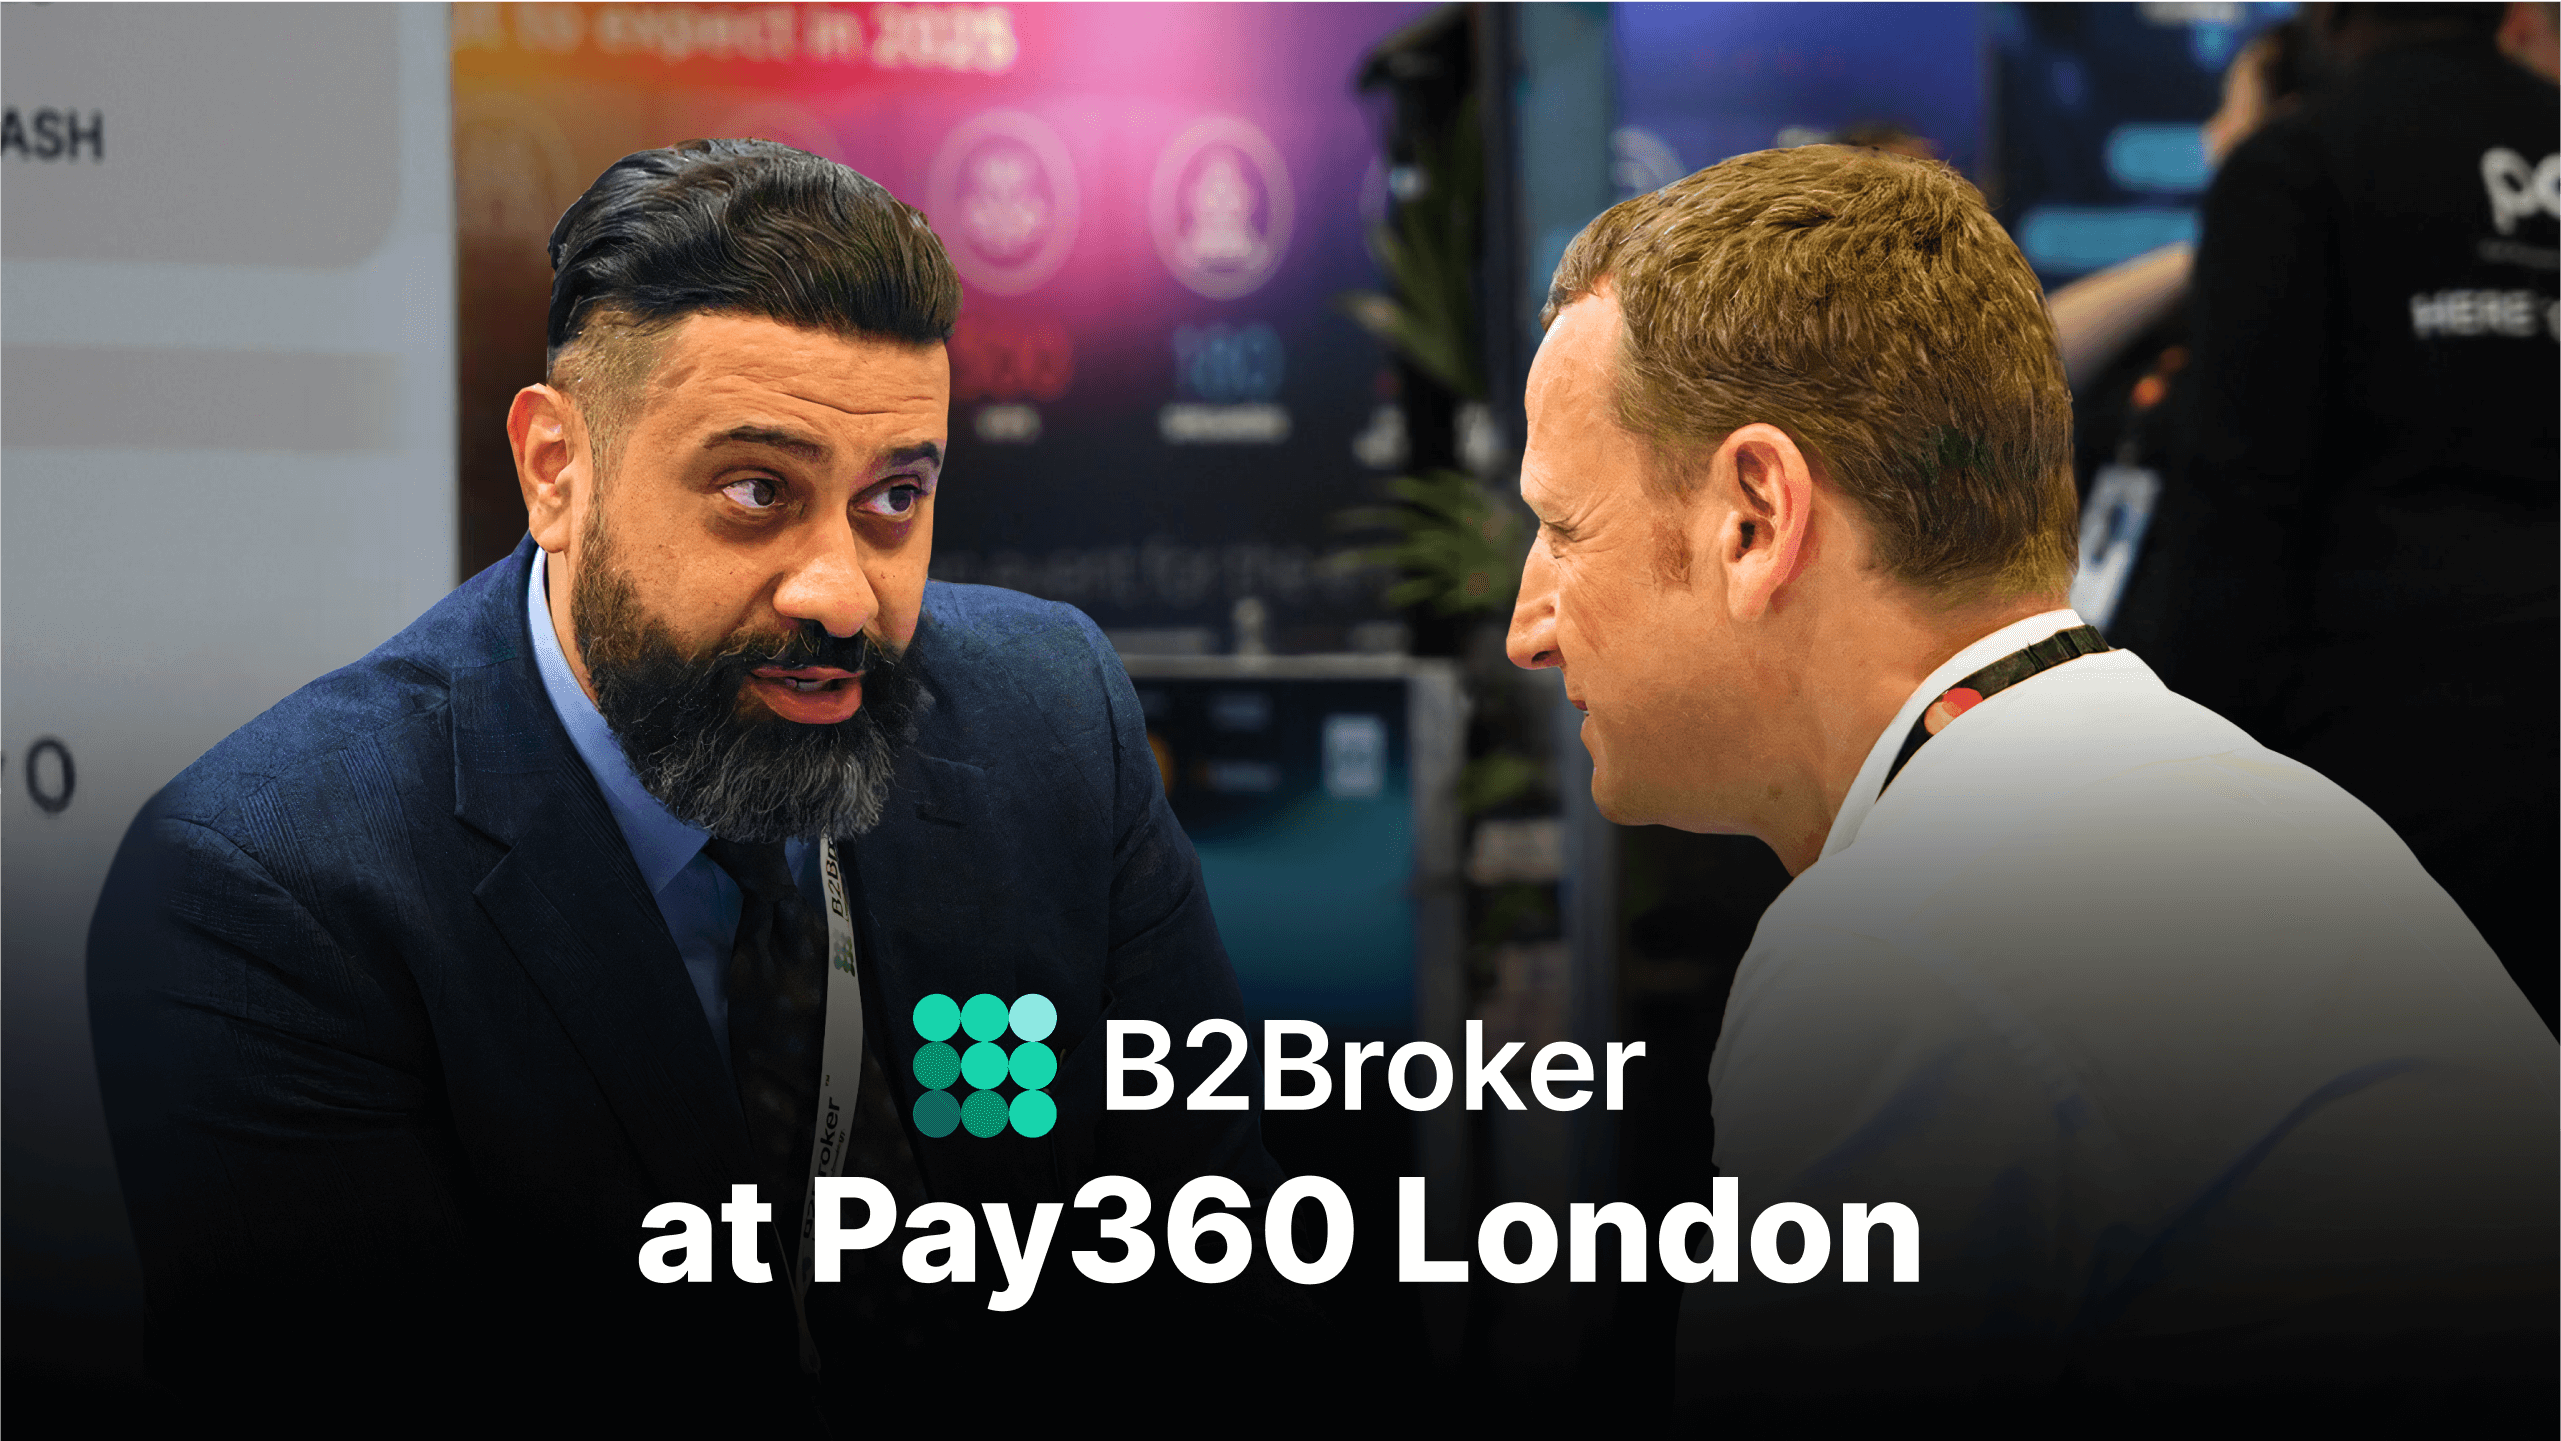 Highlighting our Participation at The Massive PAY360 London Expo